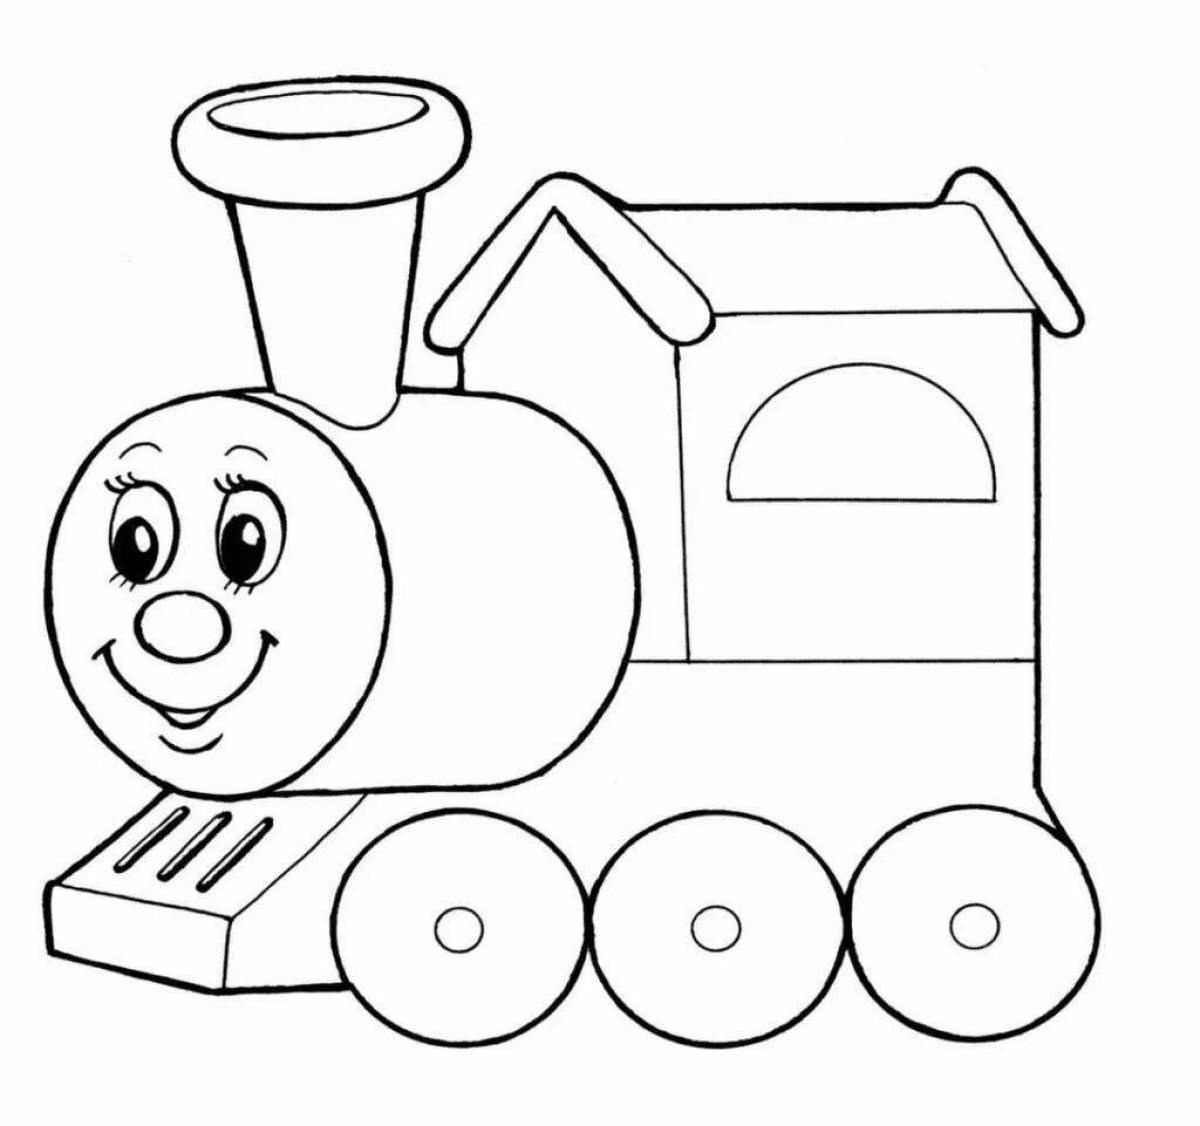 Luxury steam locomotive coloring page